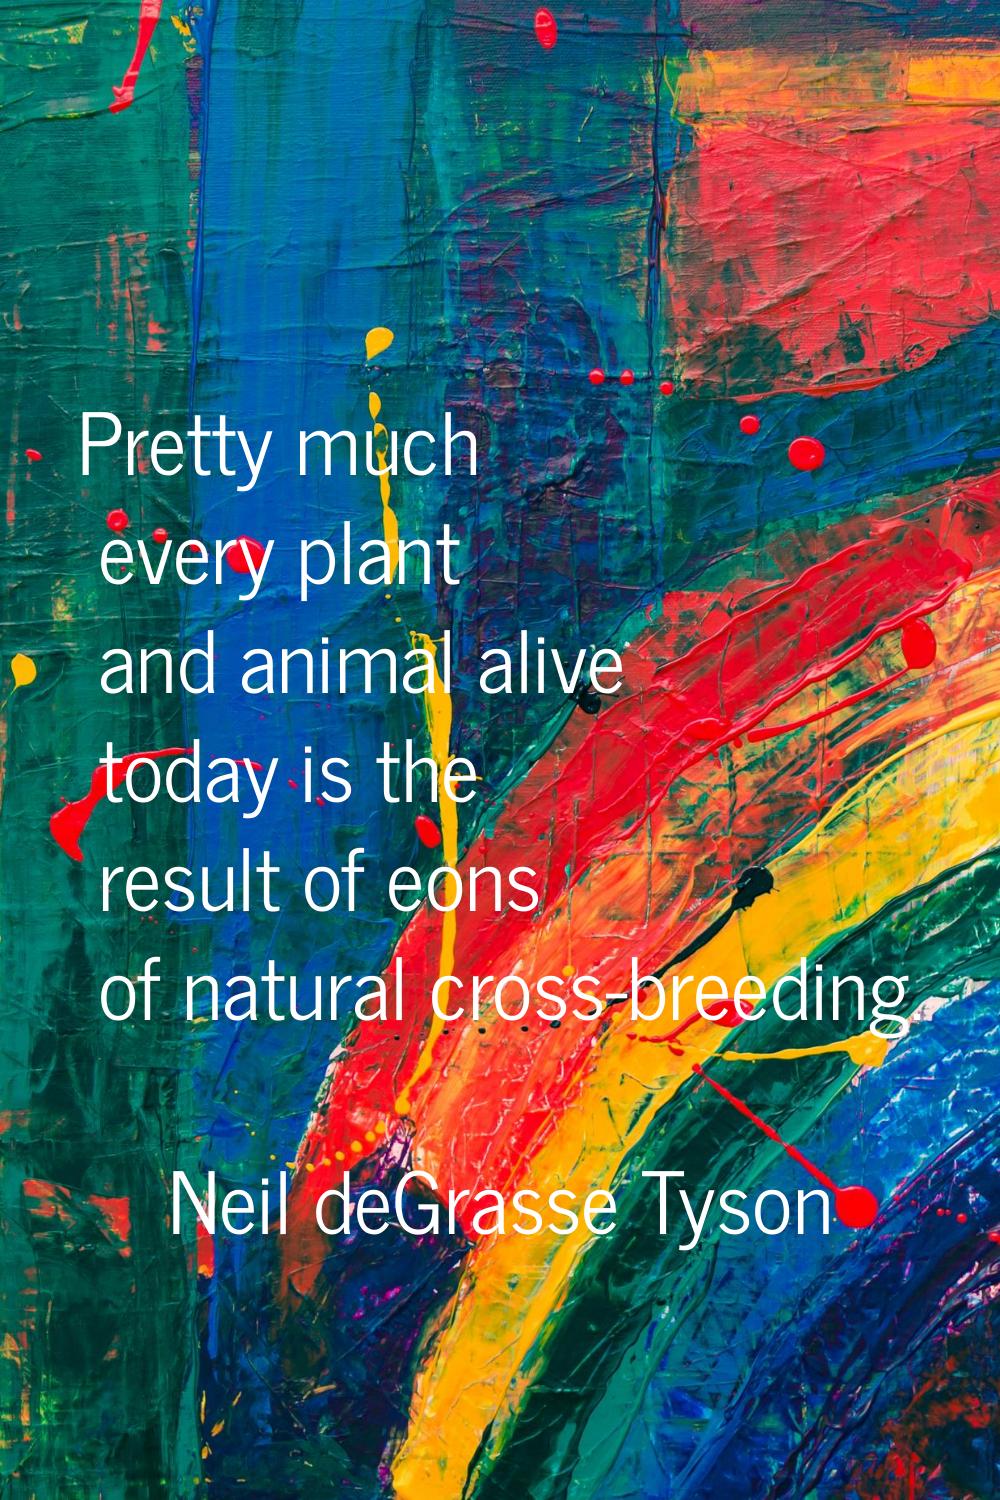 Pretty much every plant and animal alive today is the result of eons of natural cross-breeding.